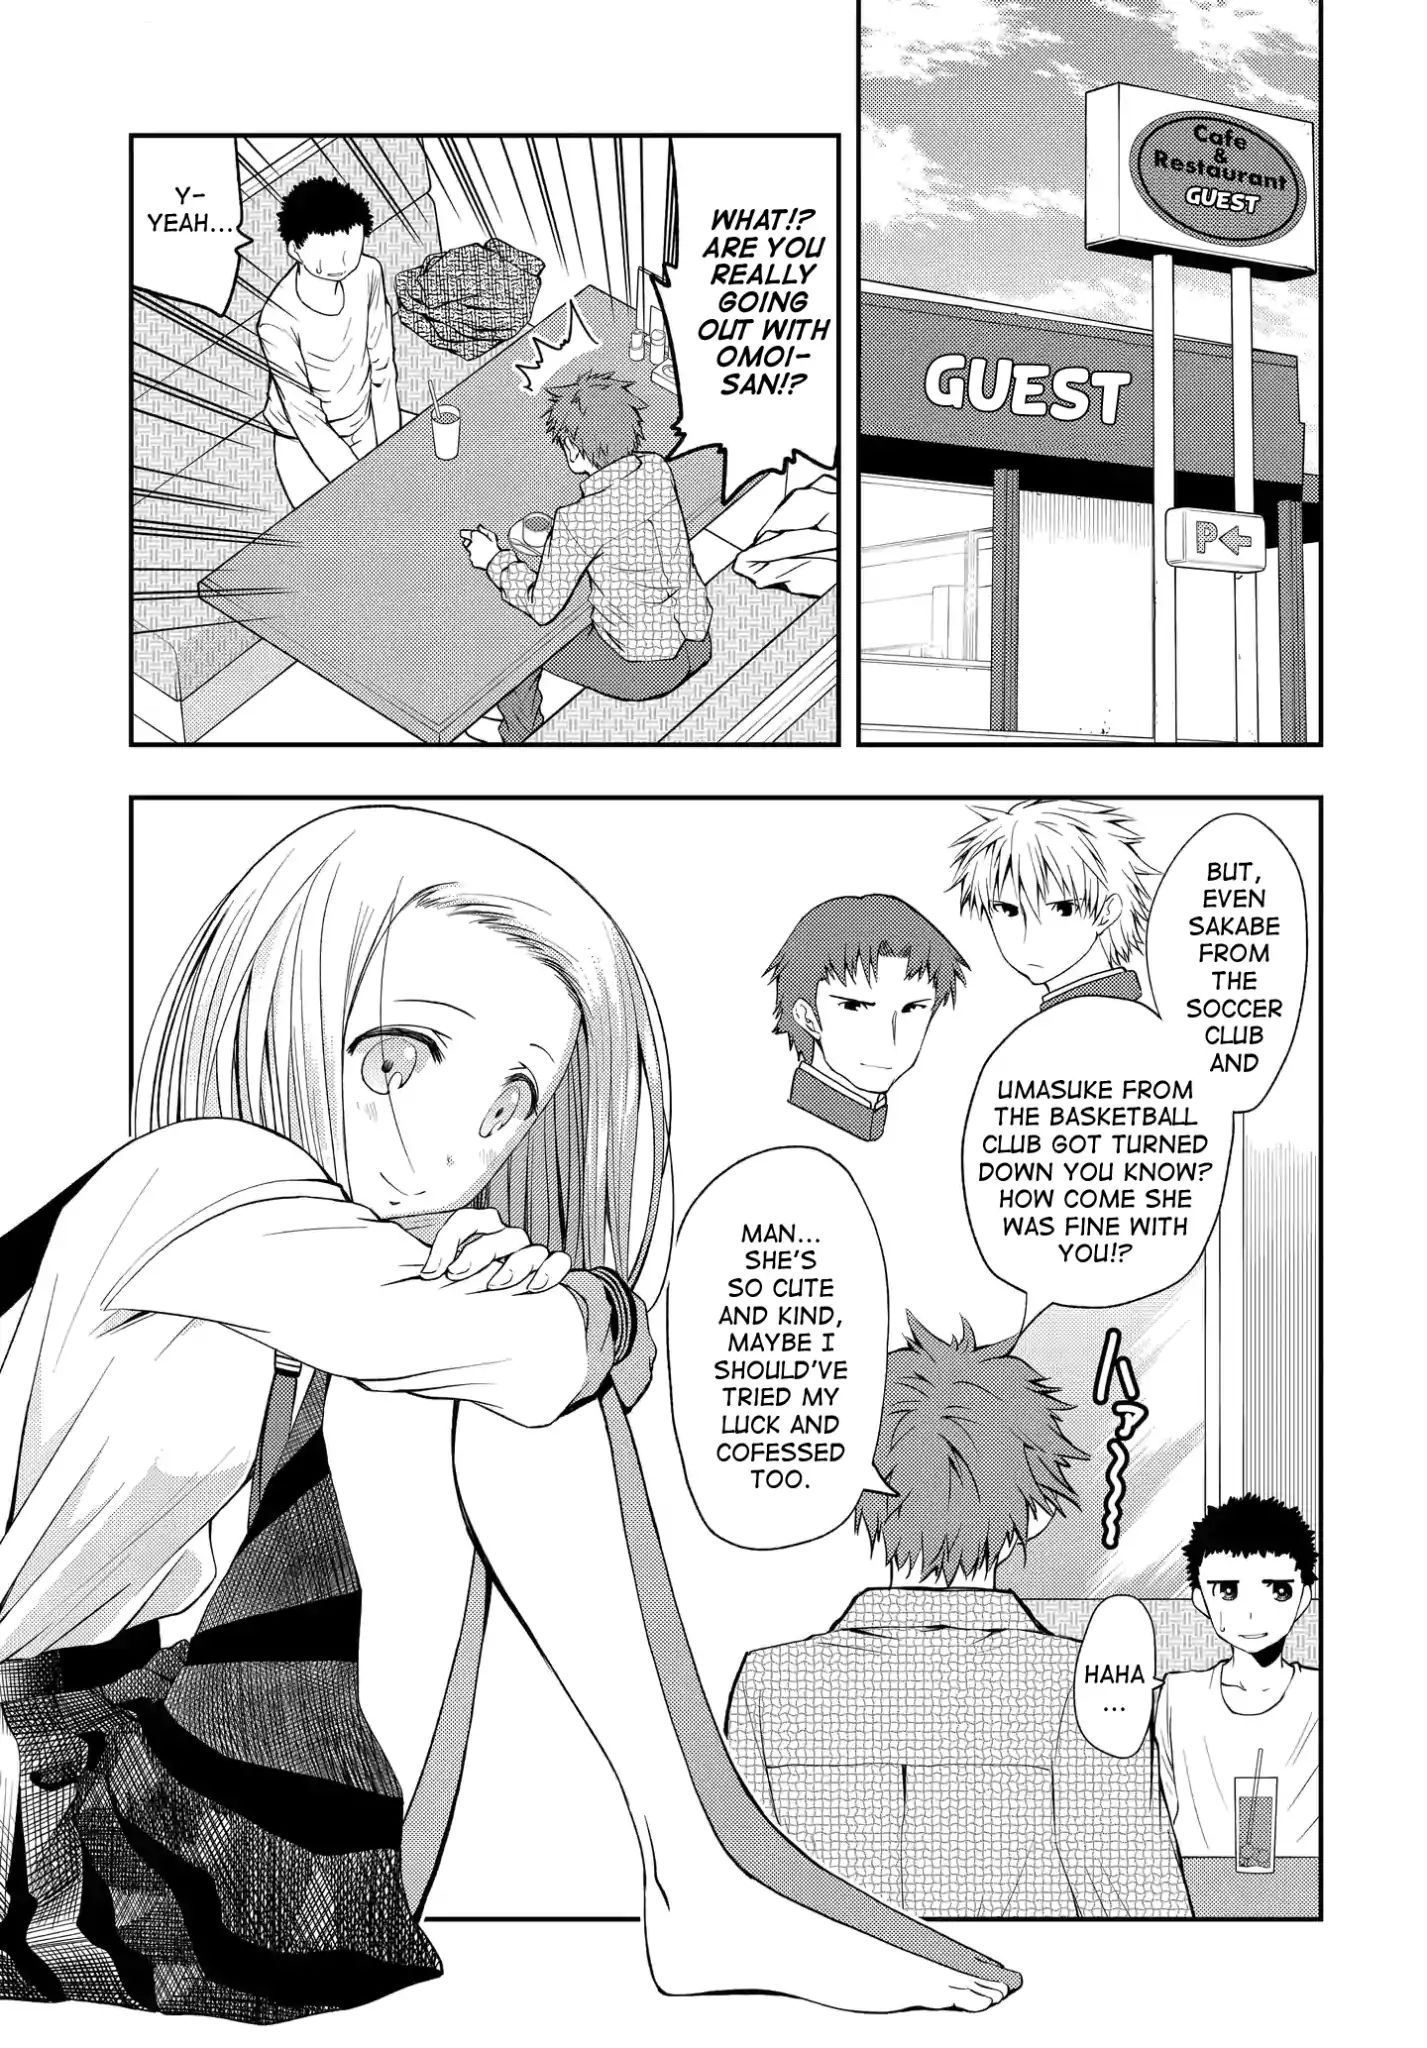 Omoi Ga Omoi Omoi-San Chapter 4: Even If You Ask Me What Do I Like - Picture 1